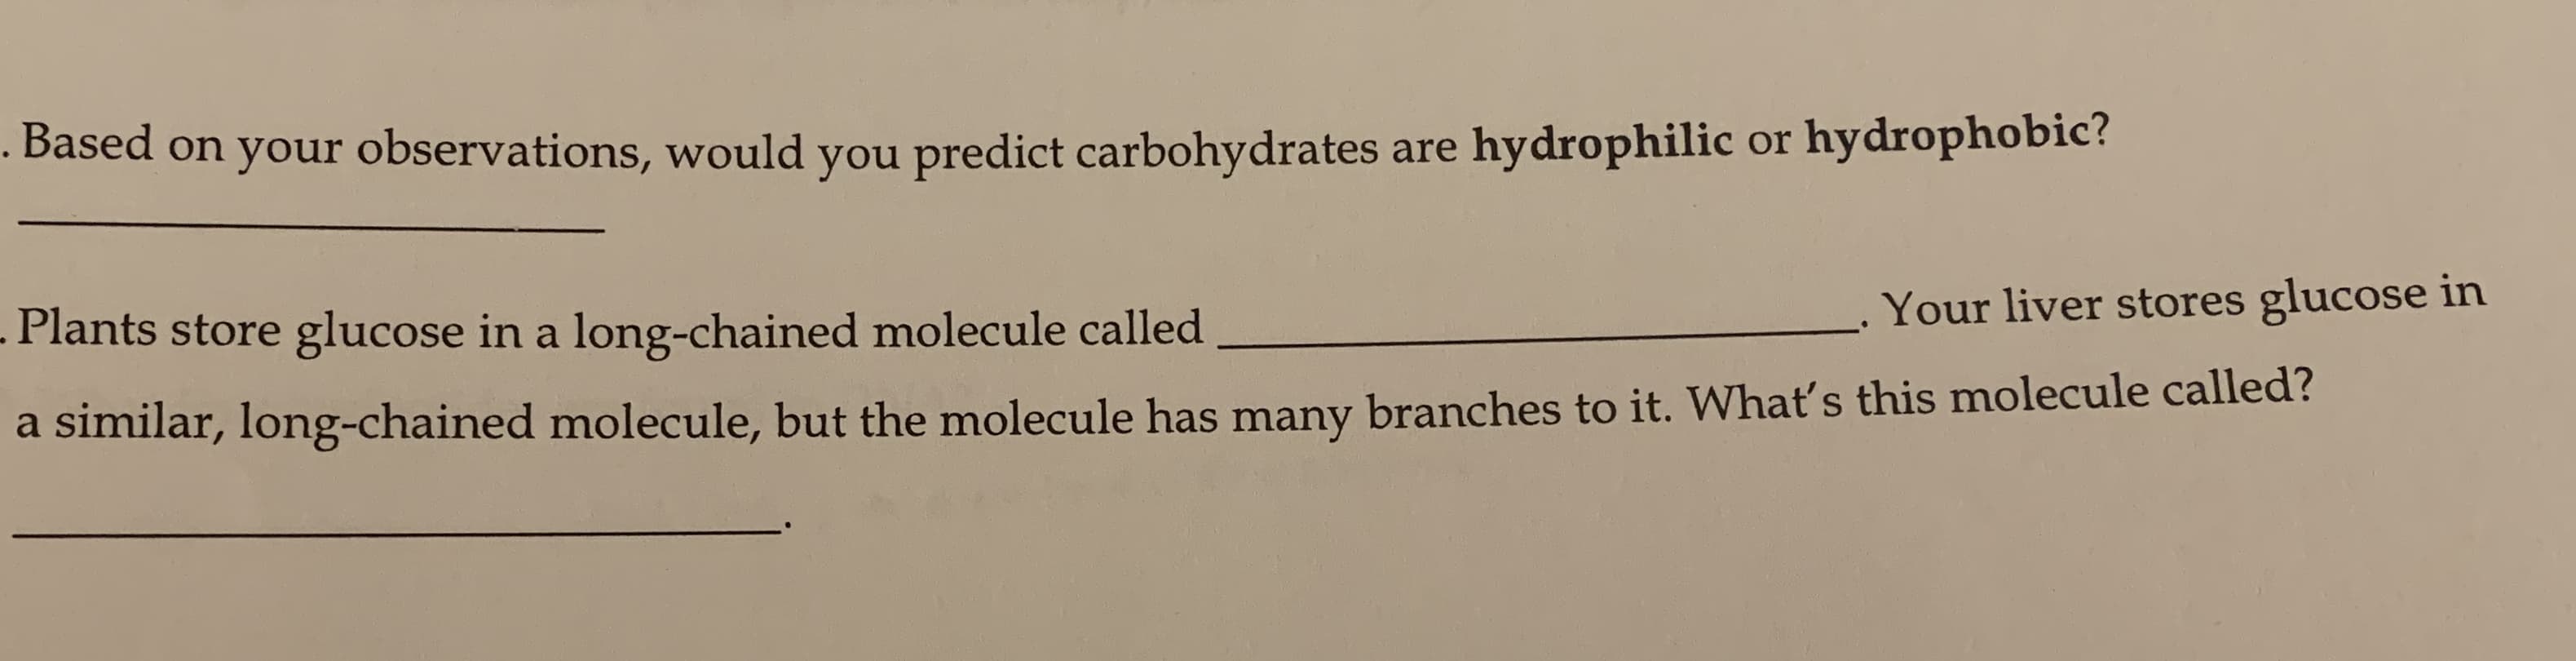 .
Based on your observations, would you predict carbohydrates are hydrophilic or hydrophobic?
Your liver stores glucose in
Plants store glucose in a long-chained molecule called
a similar, long-chained molecule, but the molecule has many branches to it. What's this molecule called?
